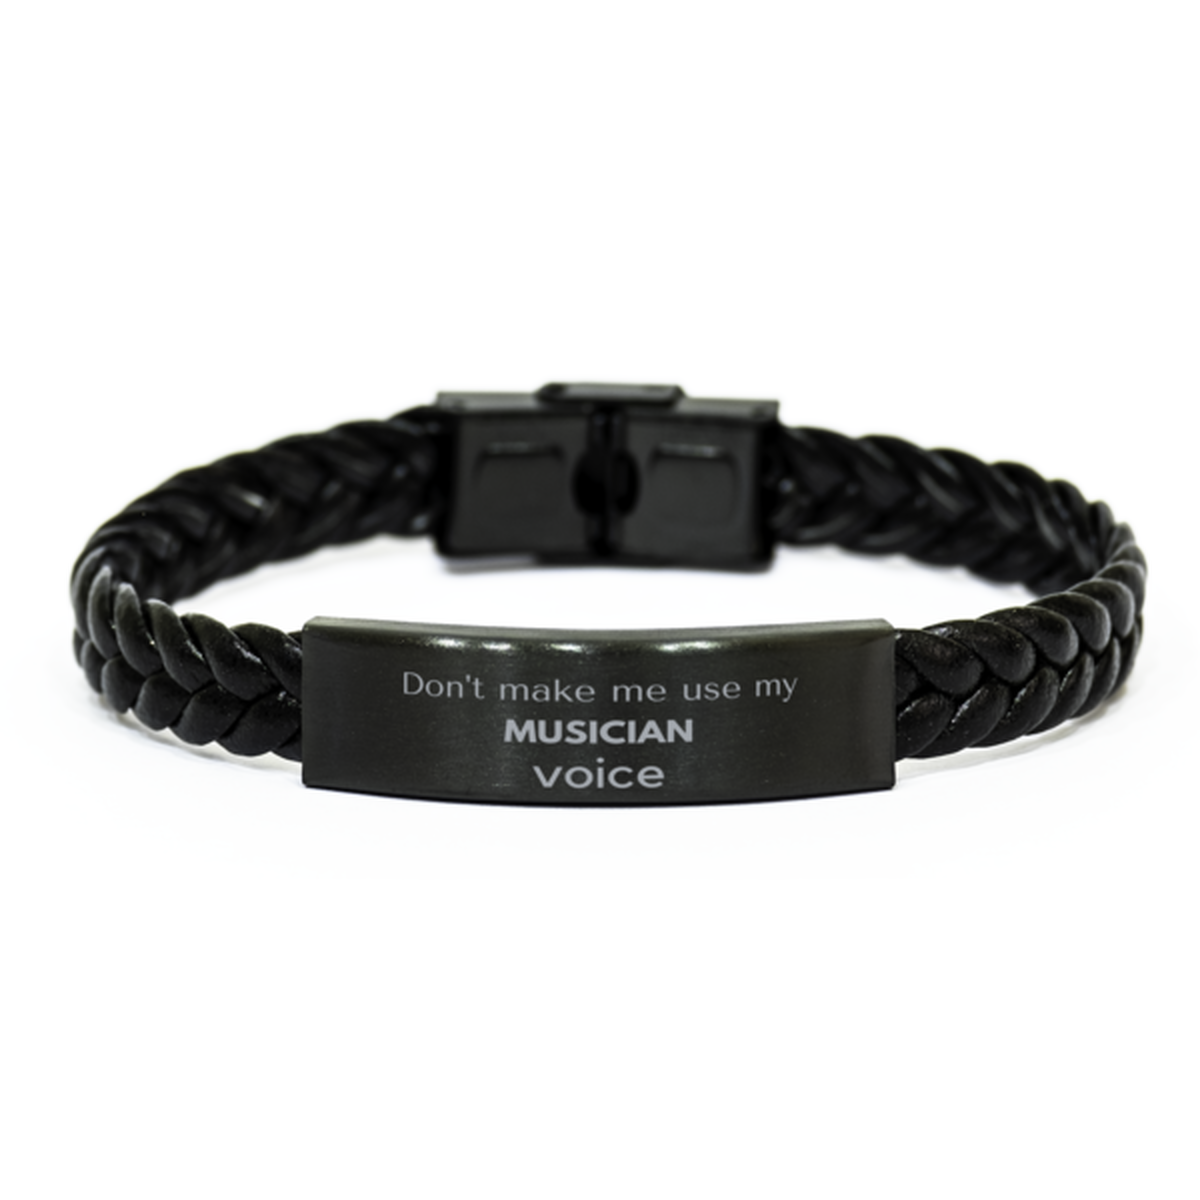 Don't make me use my Musician voice, Sarcasm Musician Gifts, Christmas Musician Braided Leather Bracelet Birthday Unique Gifts For Musician Coworkers, Men, Women, Colleague, Friends